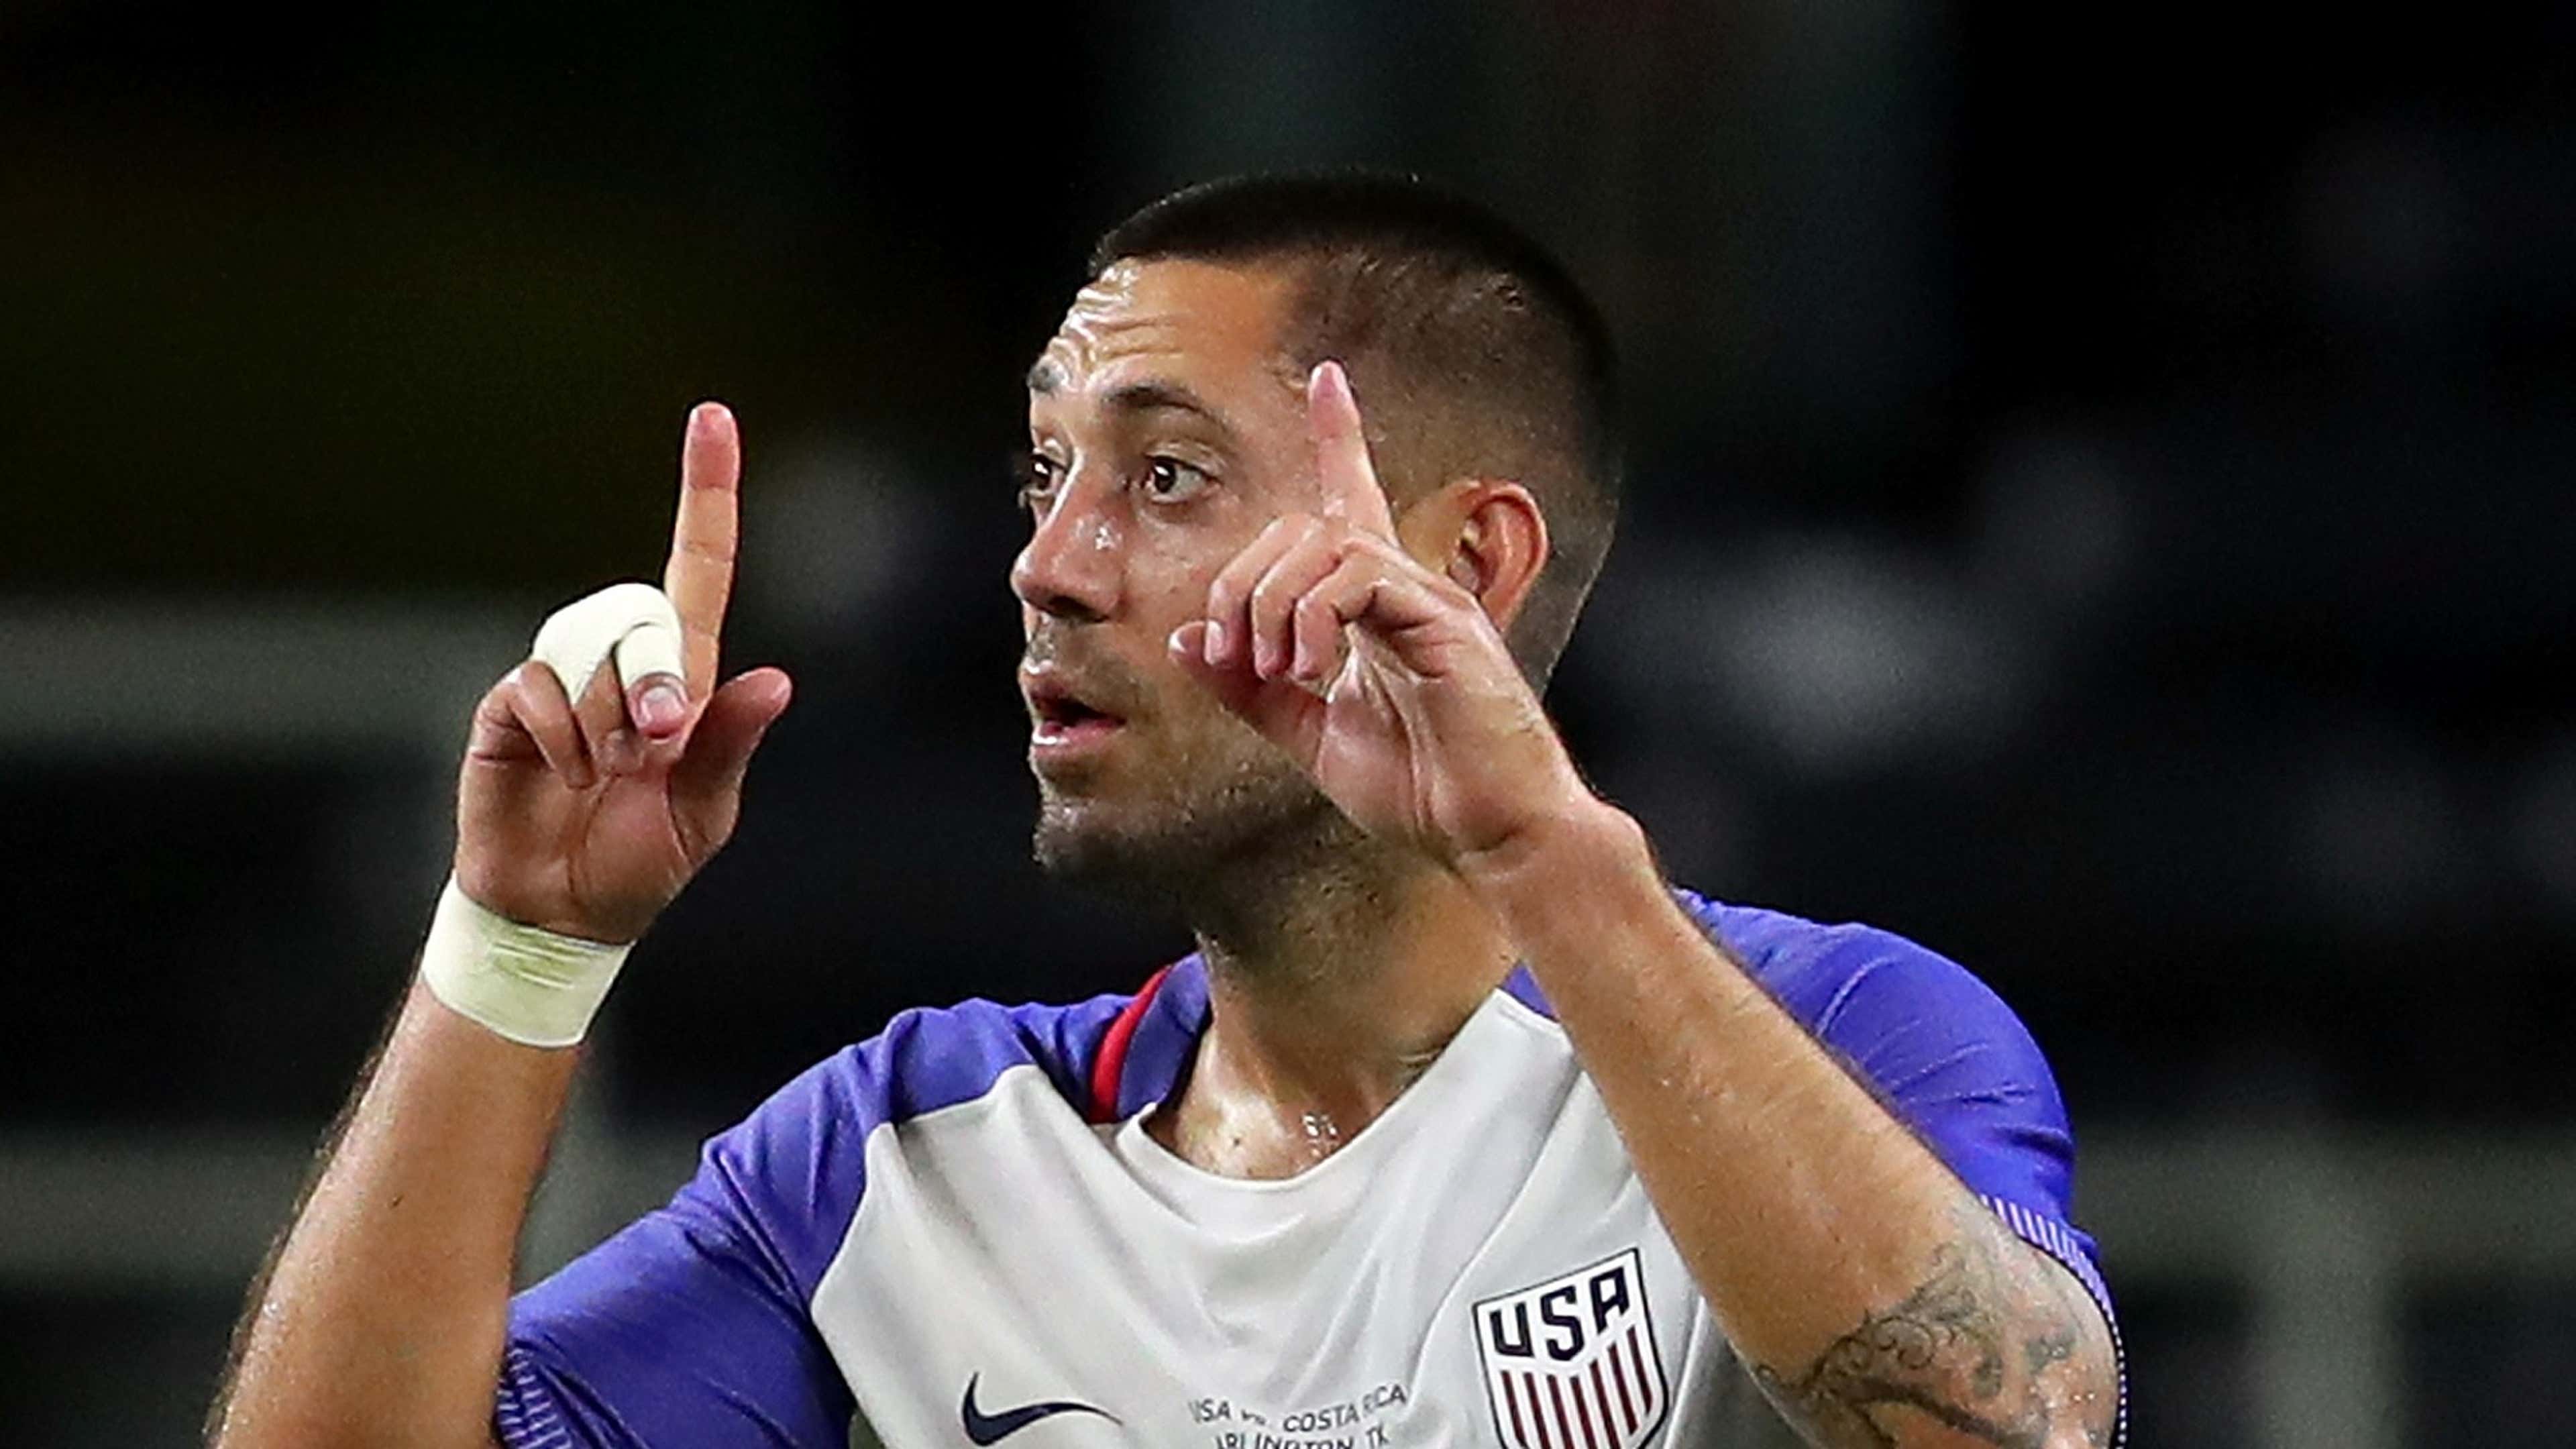 Clint Dempsey retires: American soccer legend steps away from the